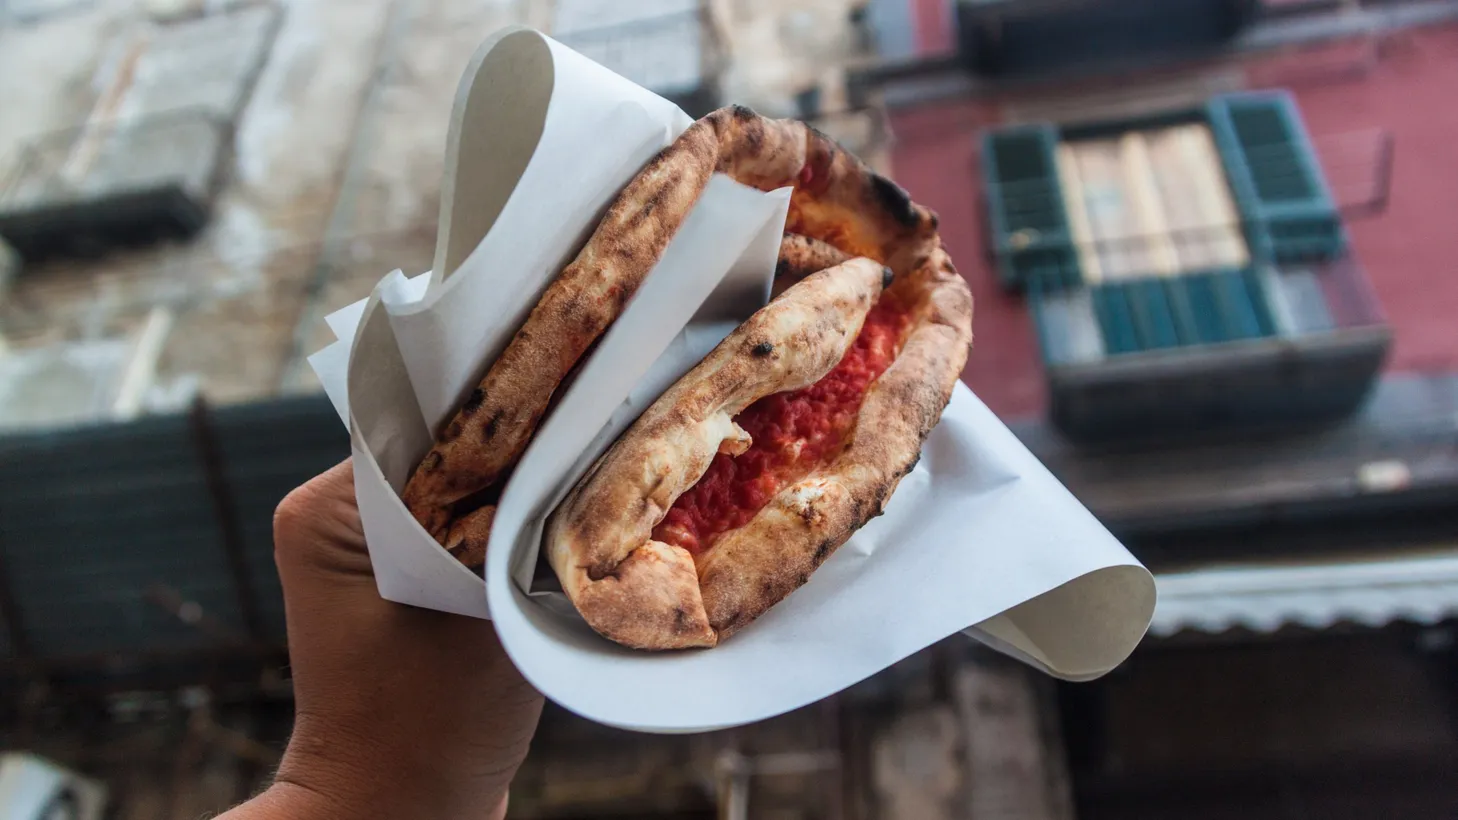 "Naples is a great example of a city that hasn't lost its connection to its food and its sense of identity," says food writer Anya von Bremzen.